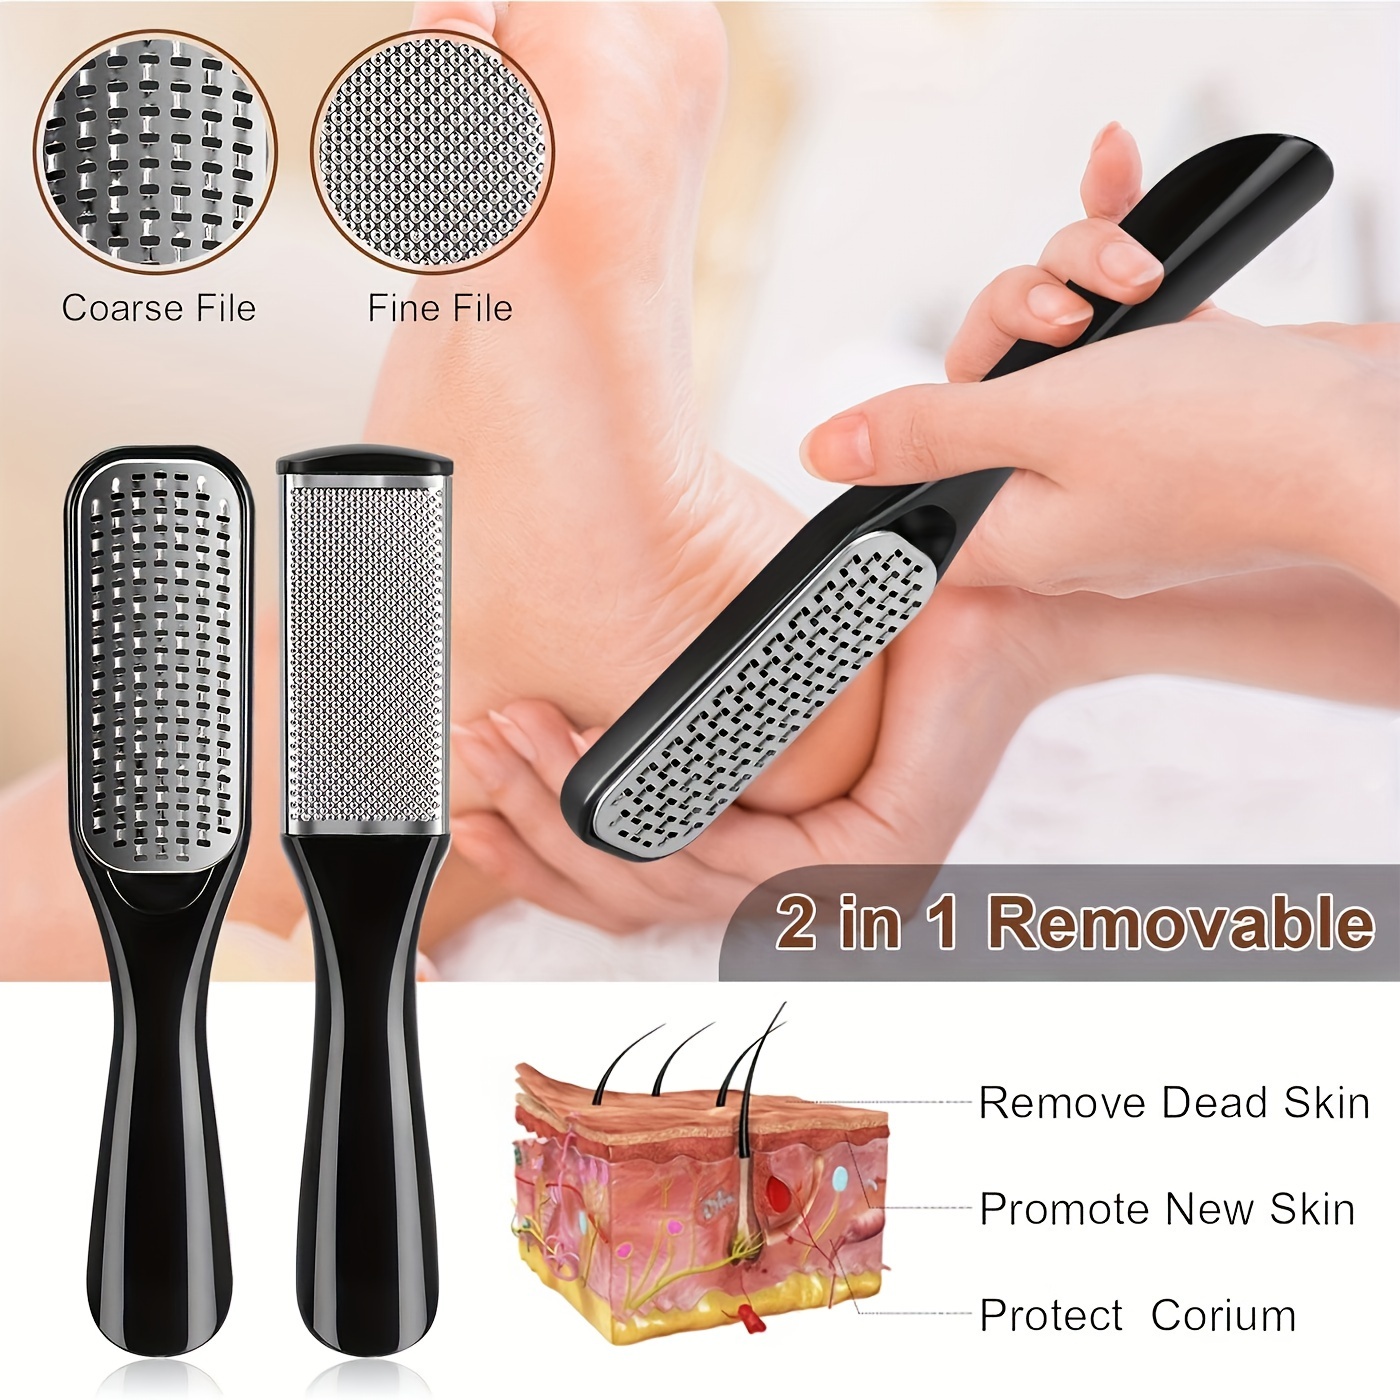 Pedicure Rasp Foot File, Professional Foot Care Pedicure Stainless